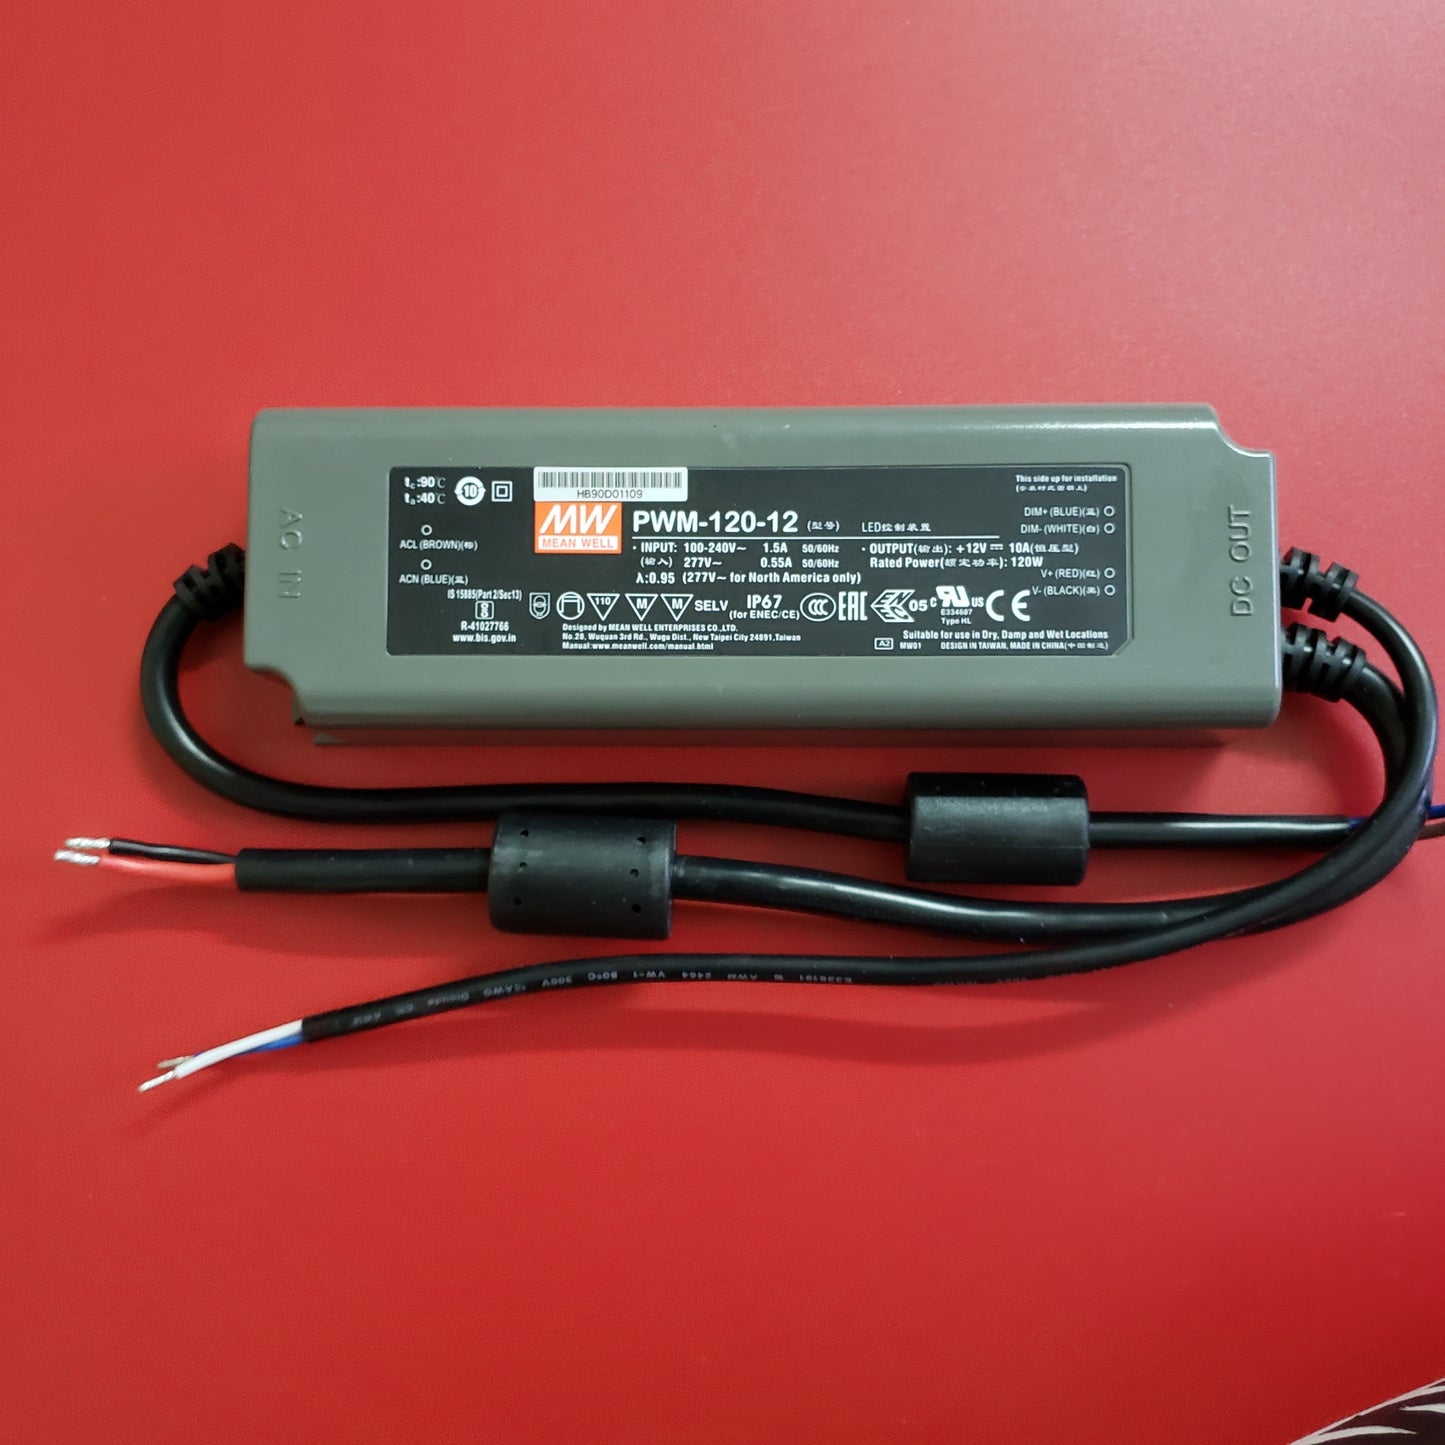 Bright weft LED switching power supply PWM-120-12/24 120W output IP67 waterproof DA2 Dimming 36/48